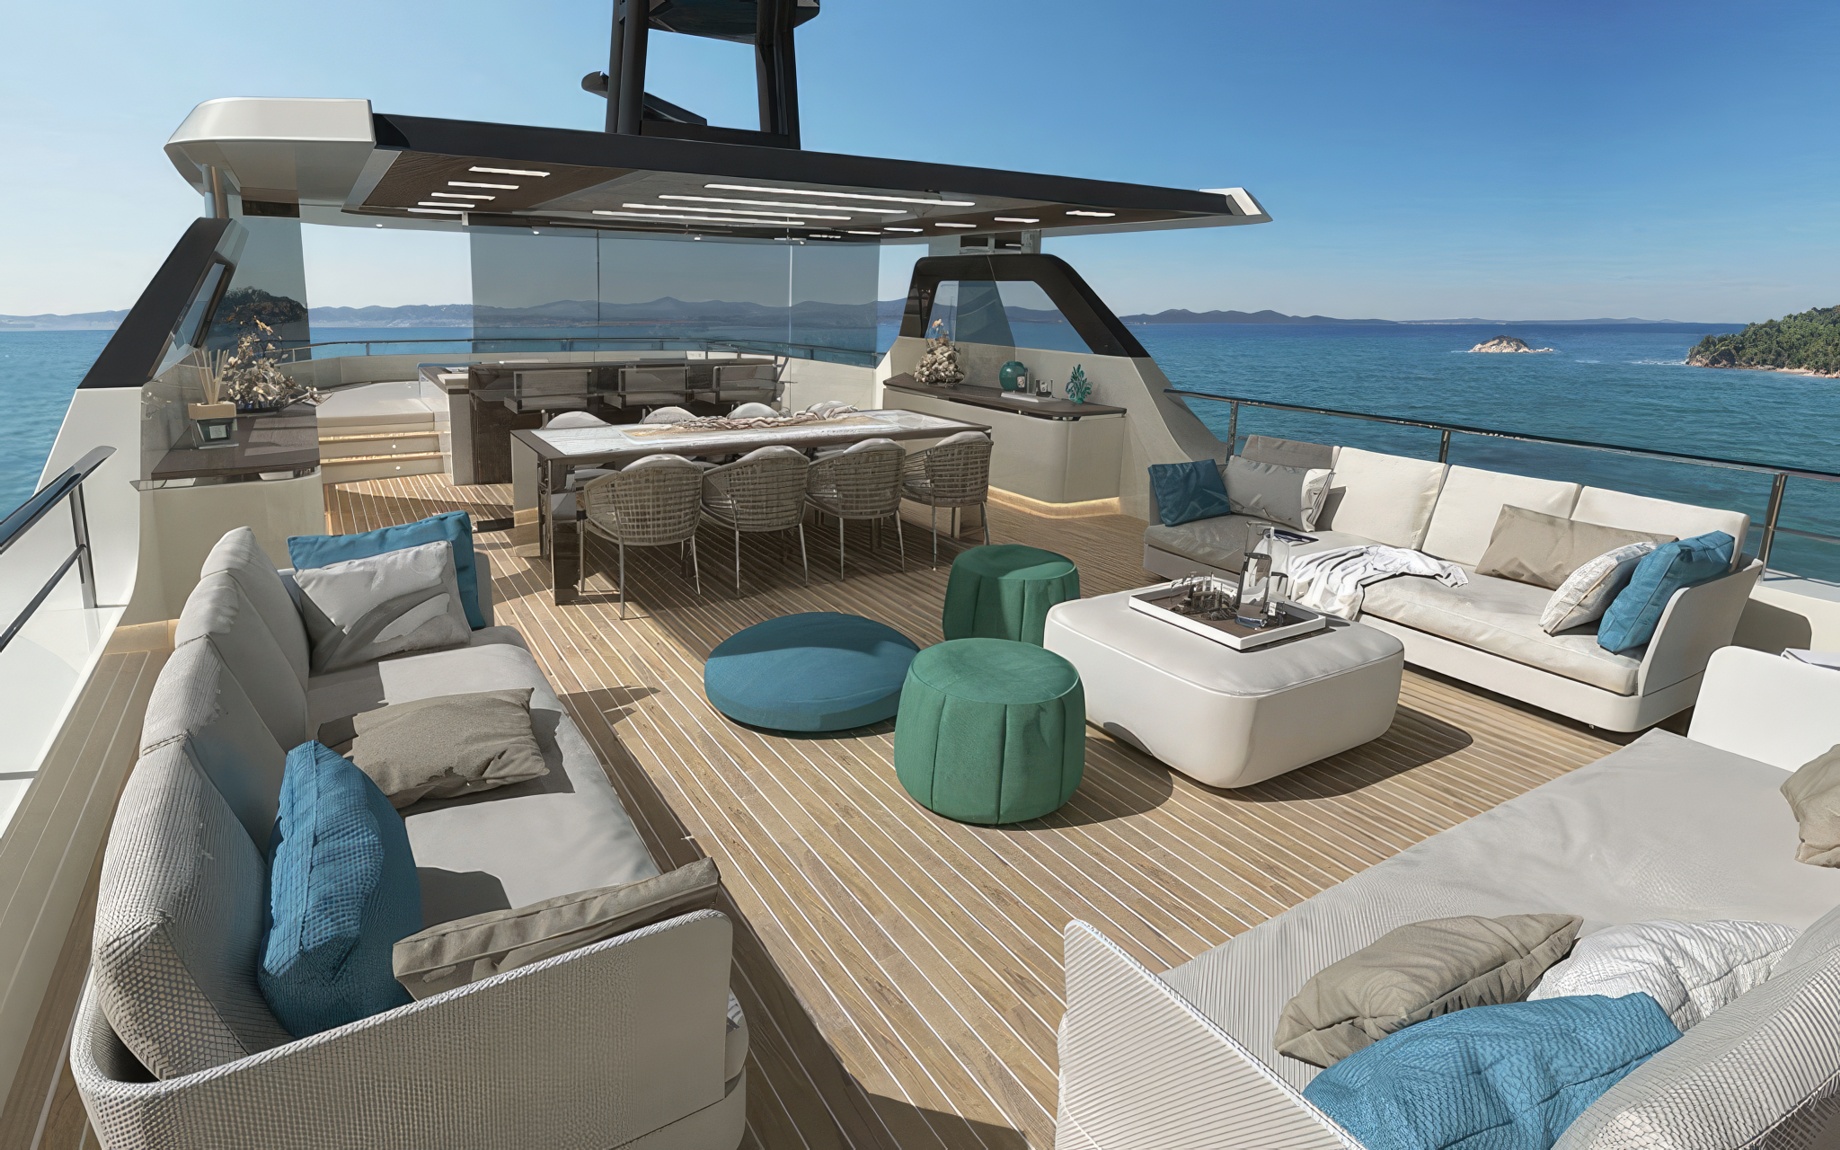 The Adventure Series – A Line of Explorer Yachts For Sale Conceived by Lynx Yachts to Navigate the World – Unparalleled Use of Space